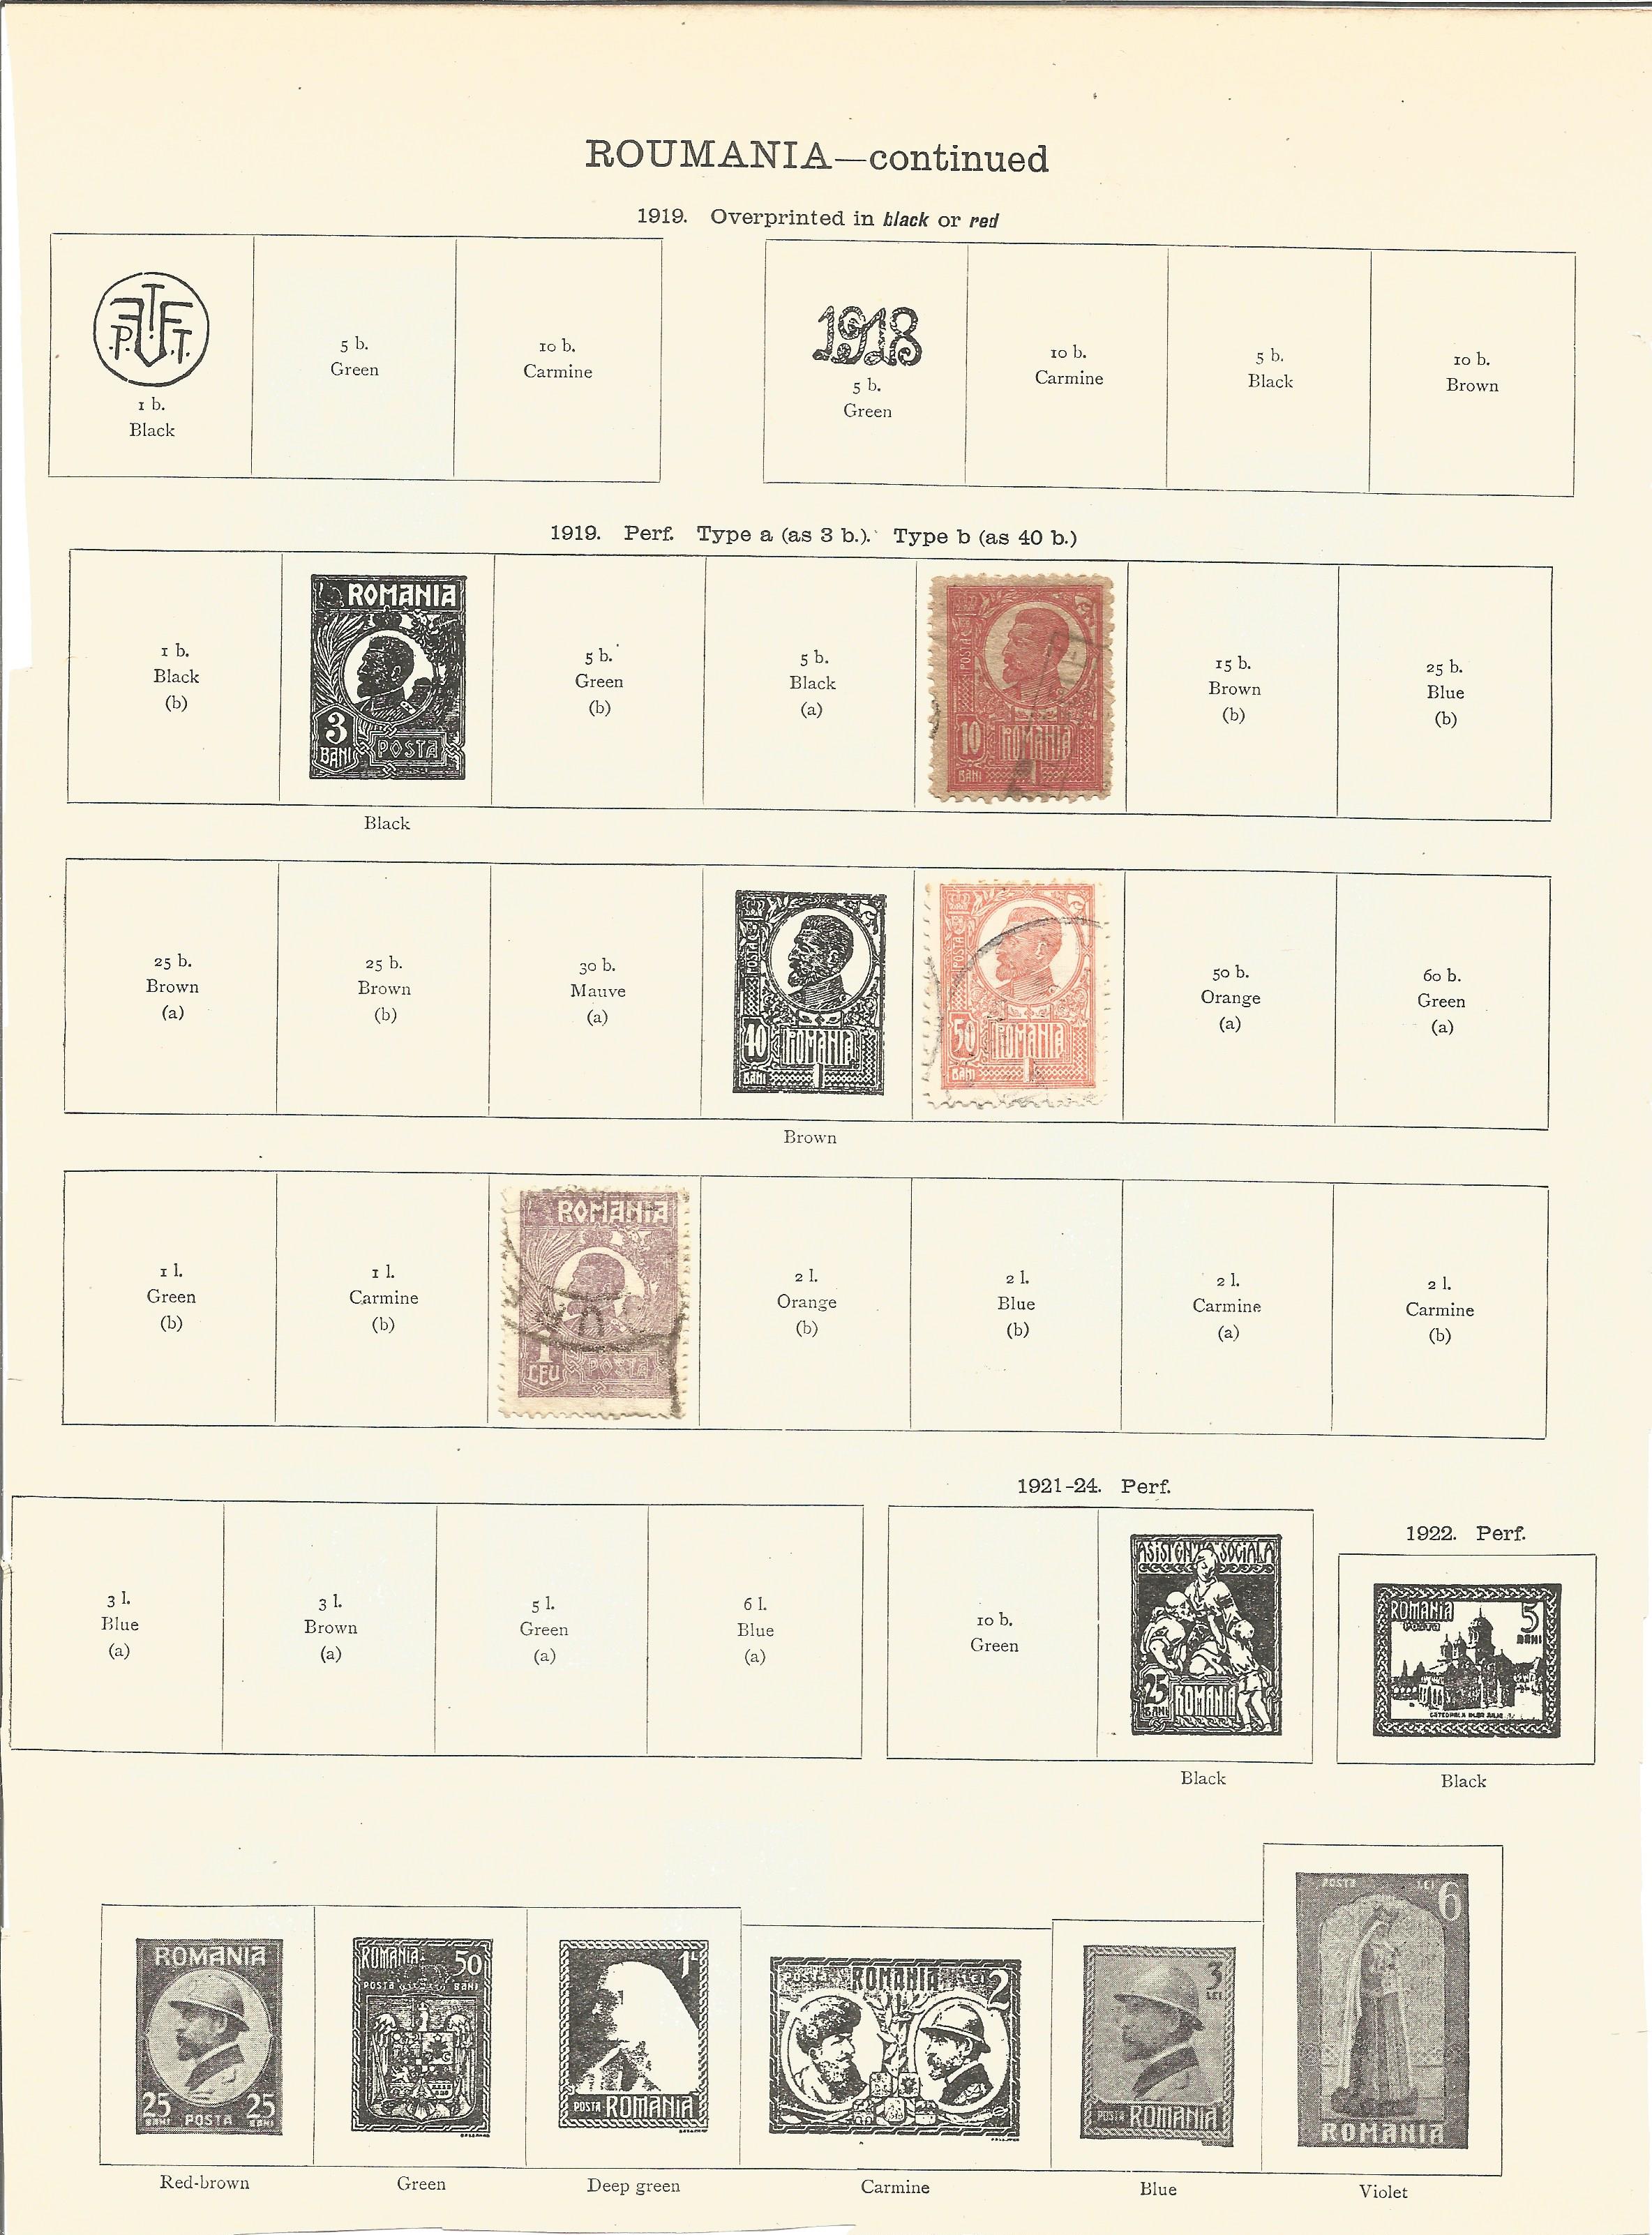 33 pages of stamps dating from around 1920 including from Poland, Hungary, Yugoslavia, Czech and